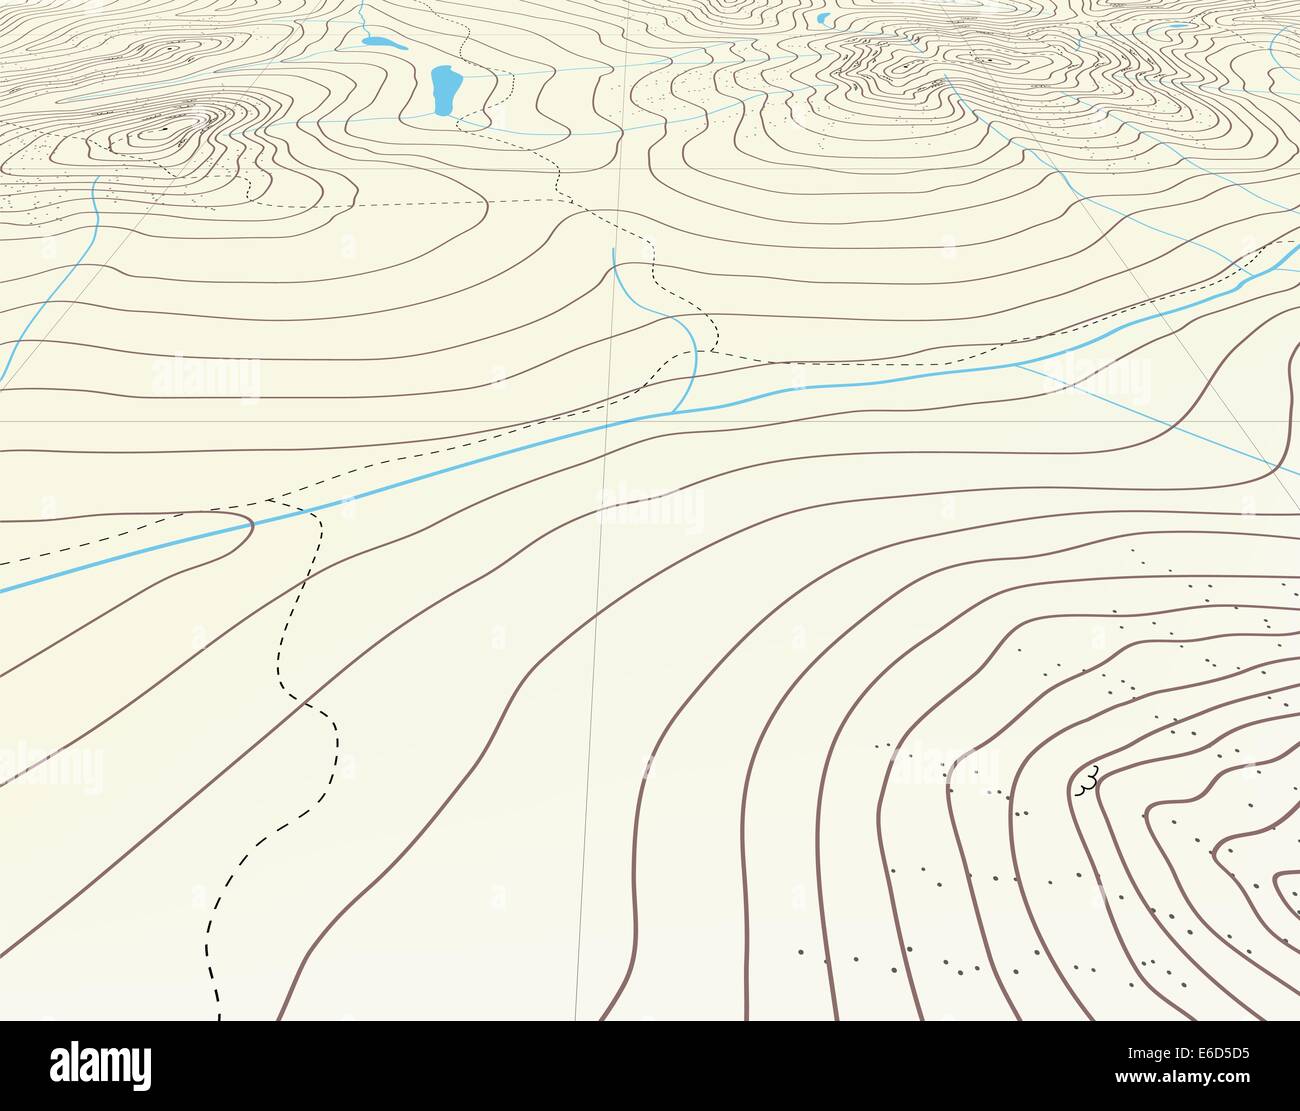 Editable vector illustration of an angled generic contour map Stock Vector